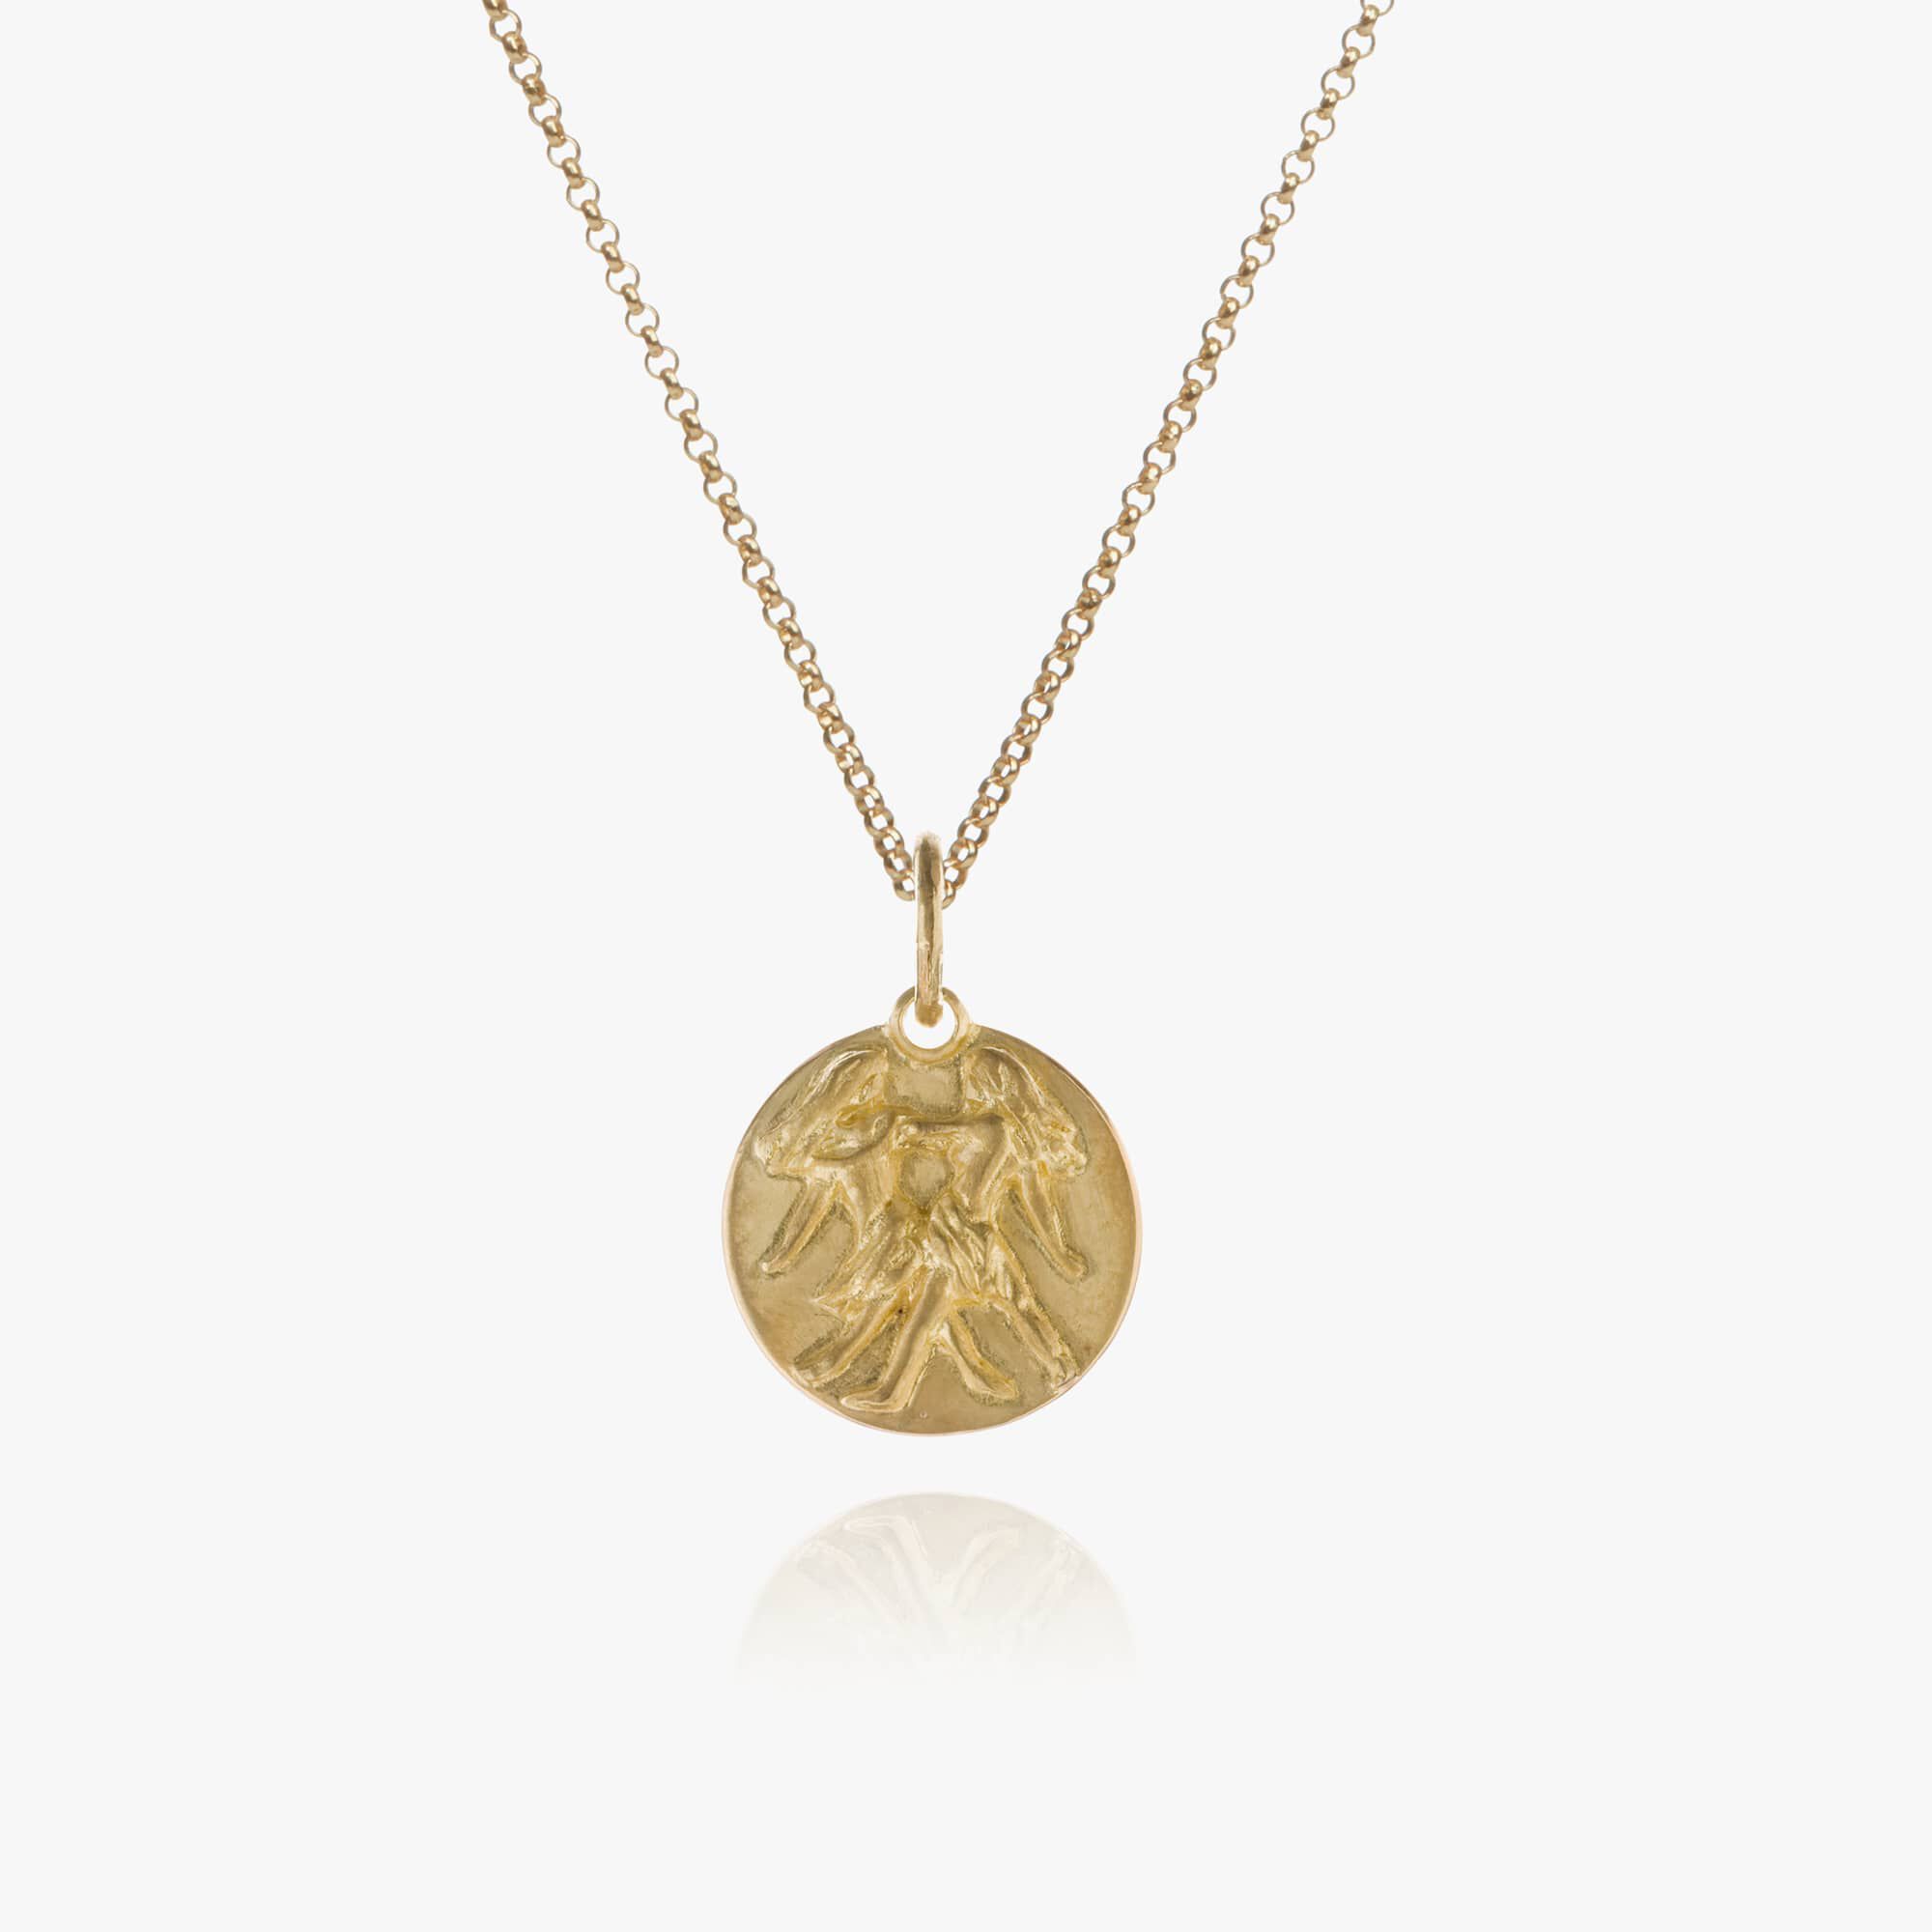 Gemini necklace gold msi modern 15 a11 review